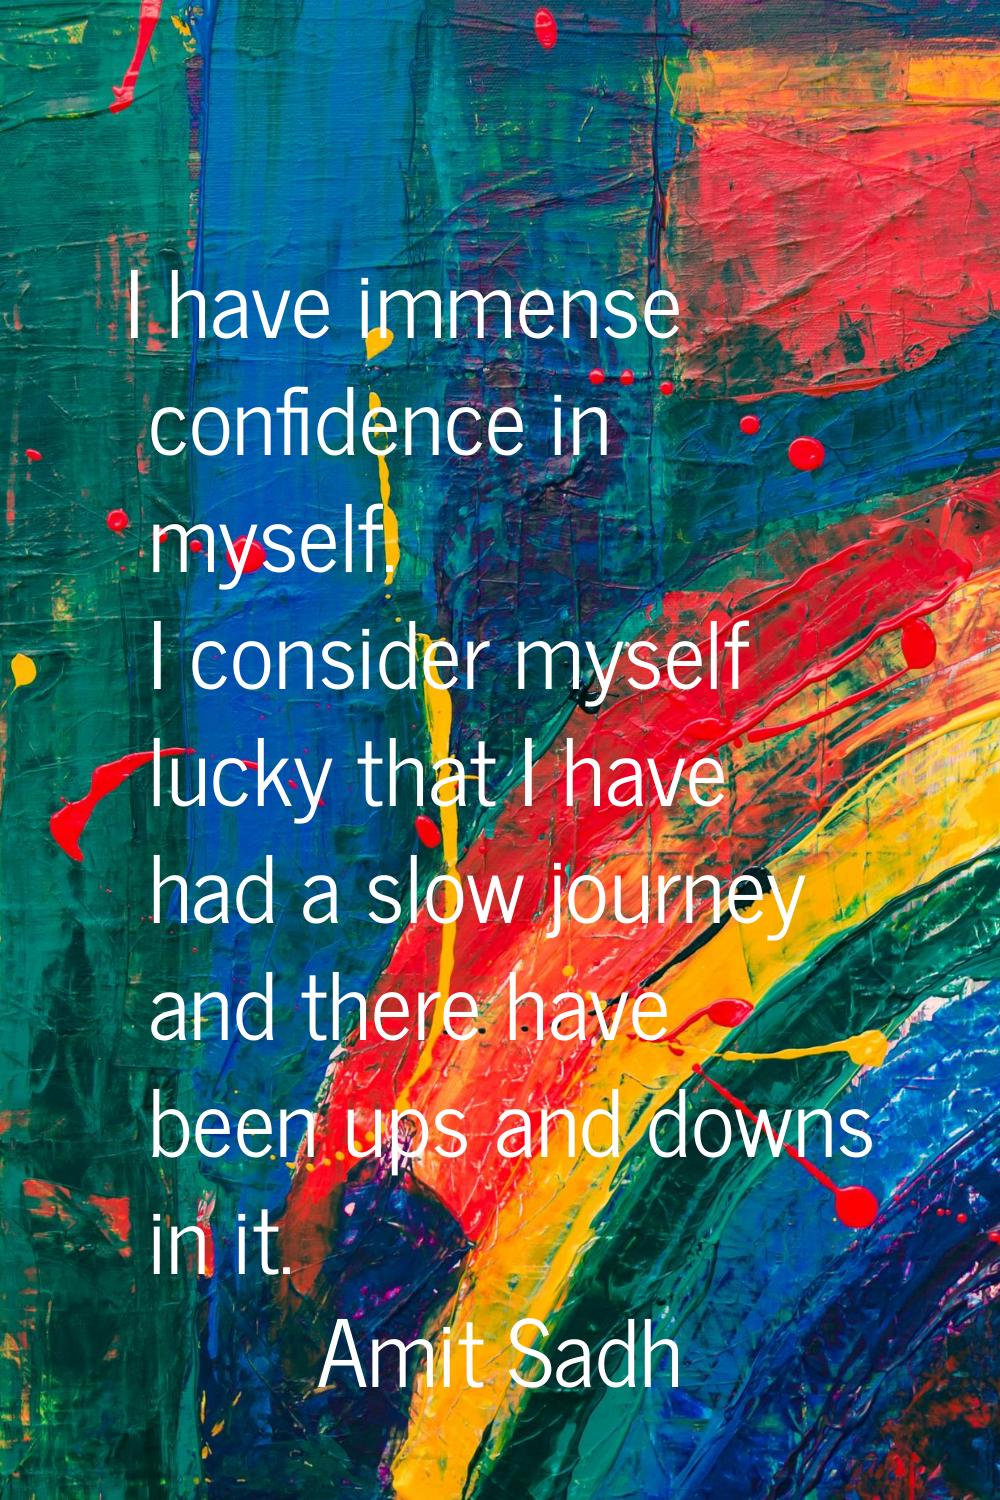 I have immense confidence in myself. I consider myself lucky that I have had a slow journey and the